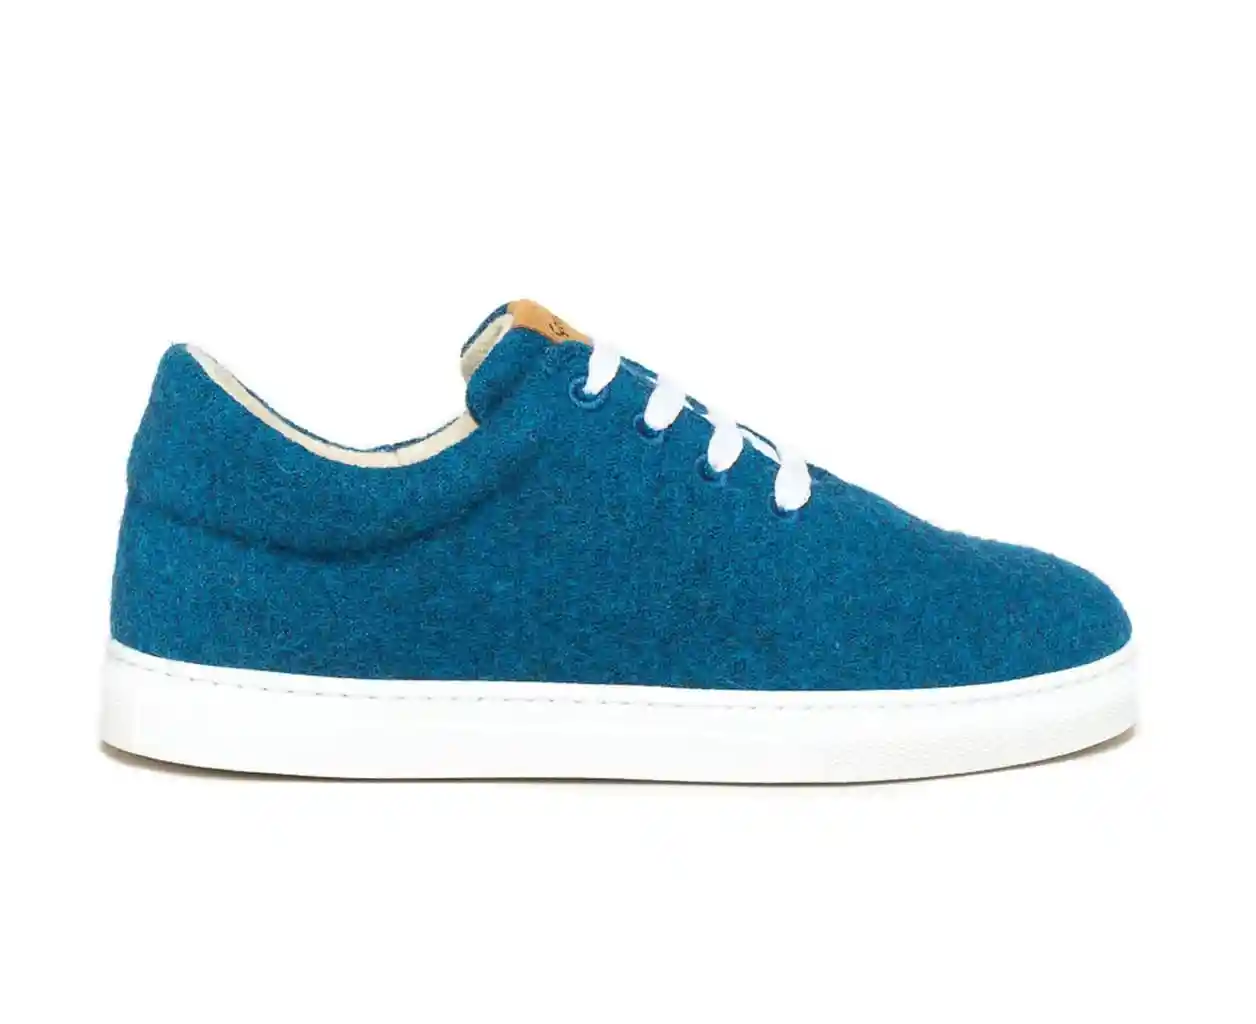 Wool shoes for men - Order online now!